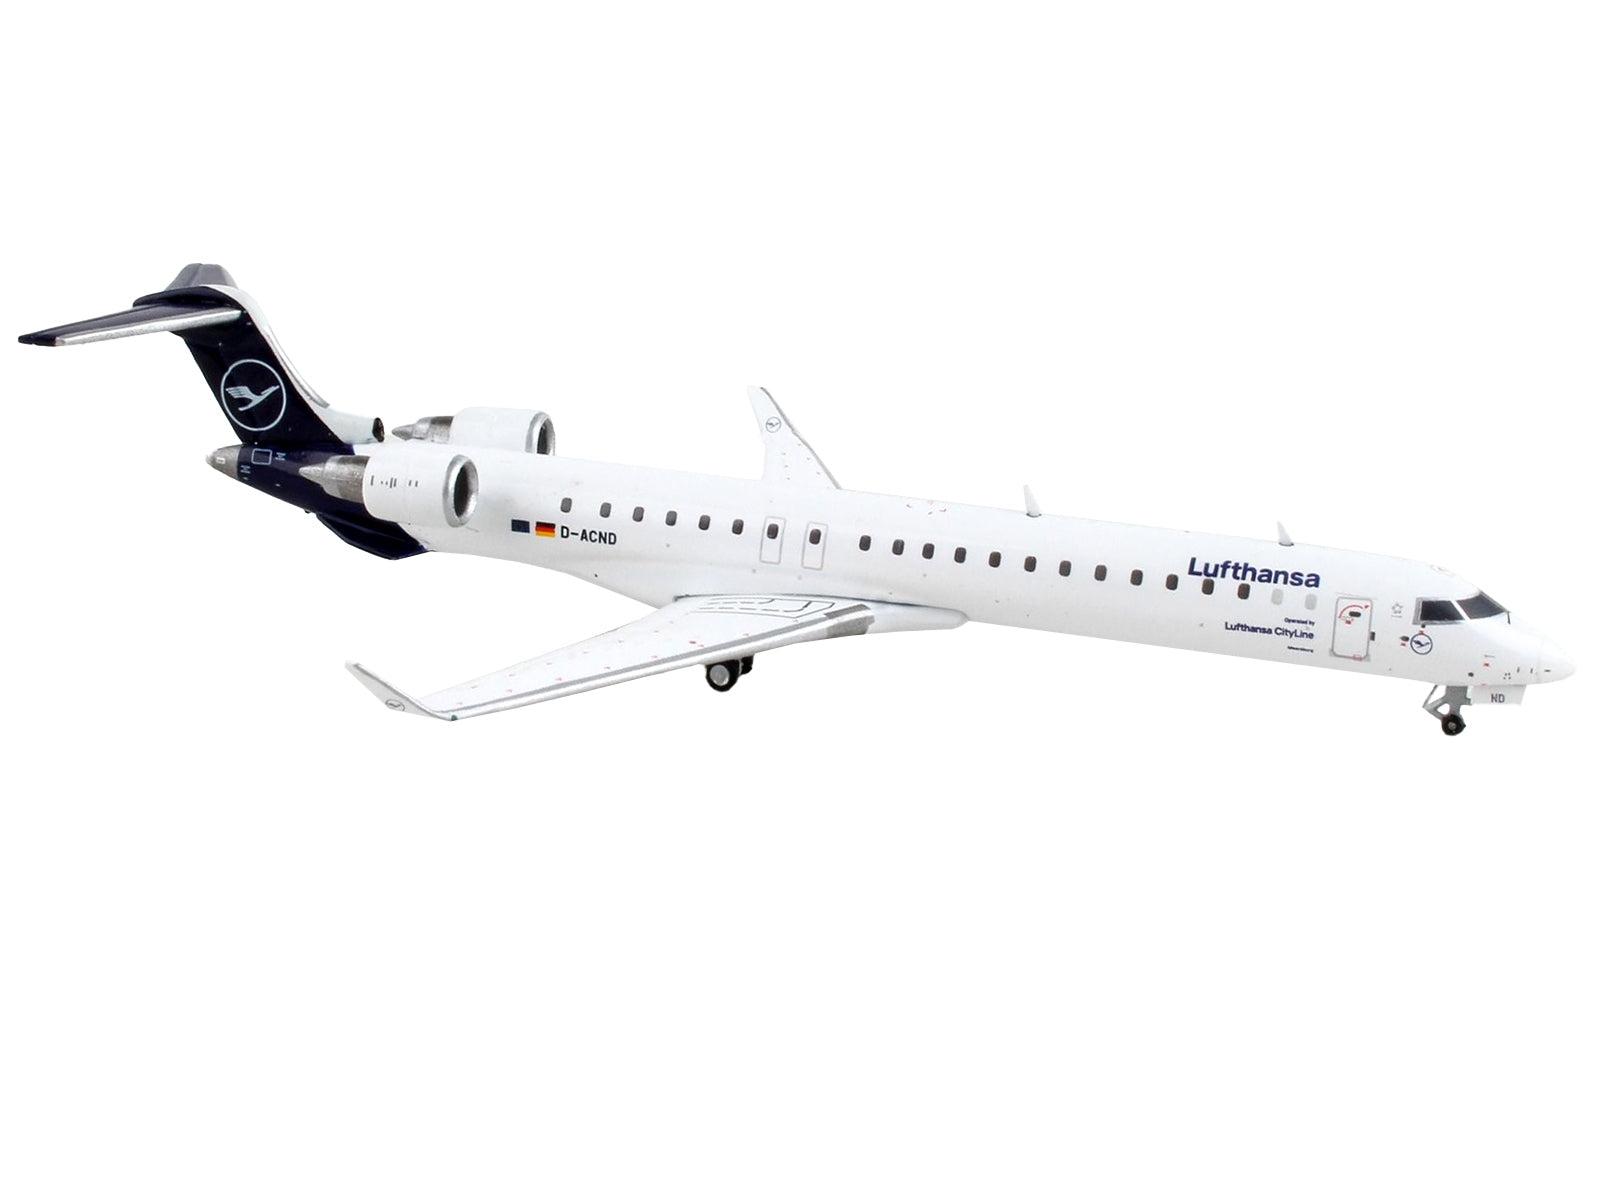 Bombardier CRJ900 Commercial Aircraft "Lufthansa" White with Dark Blue Tail 1/400 Diecast Model Airplane by GeminiJets